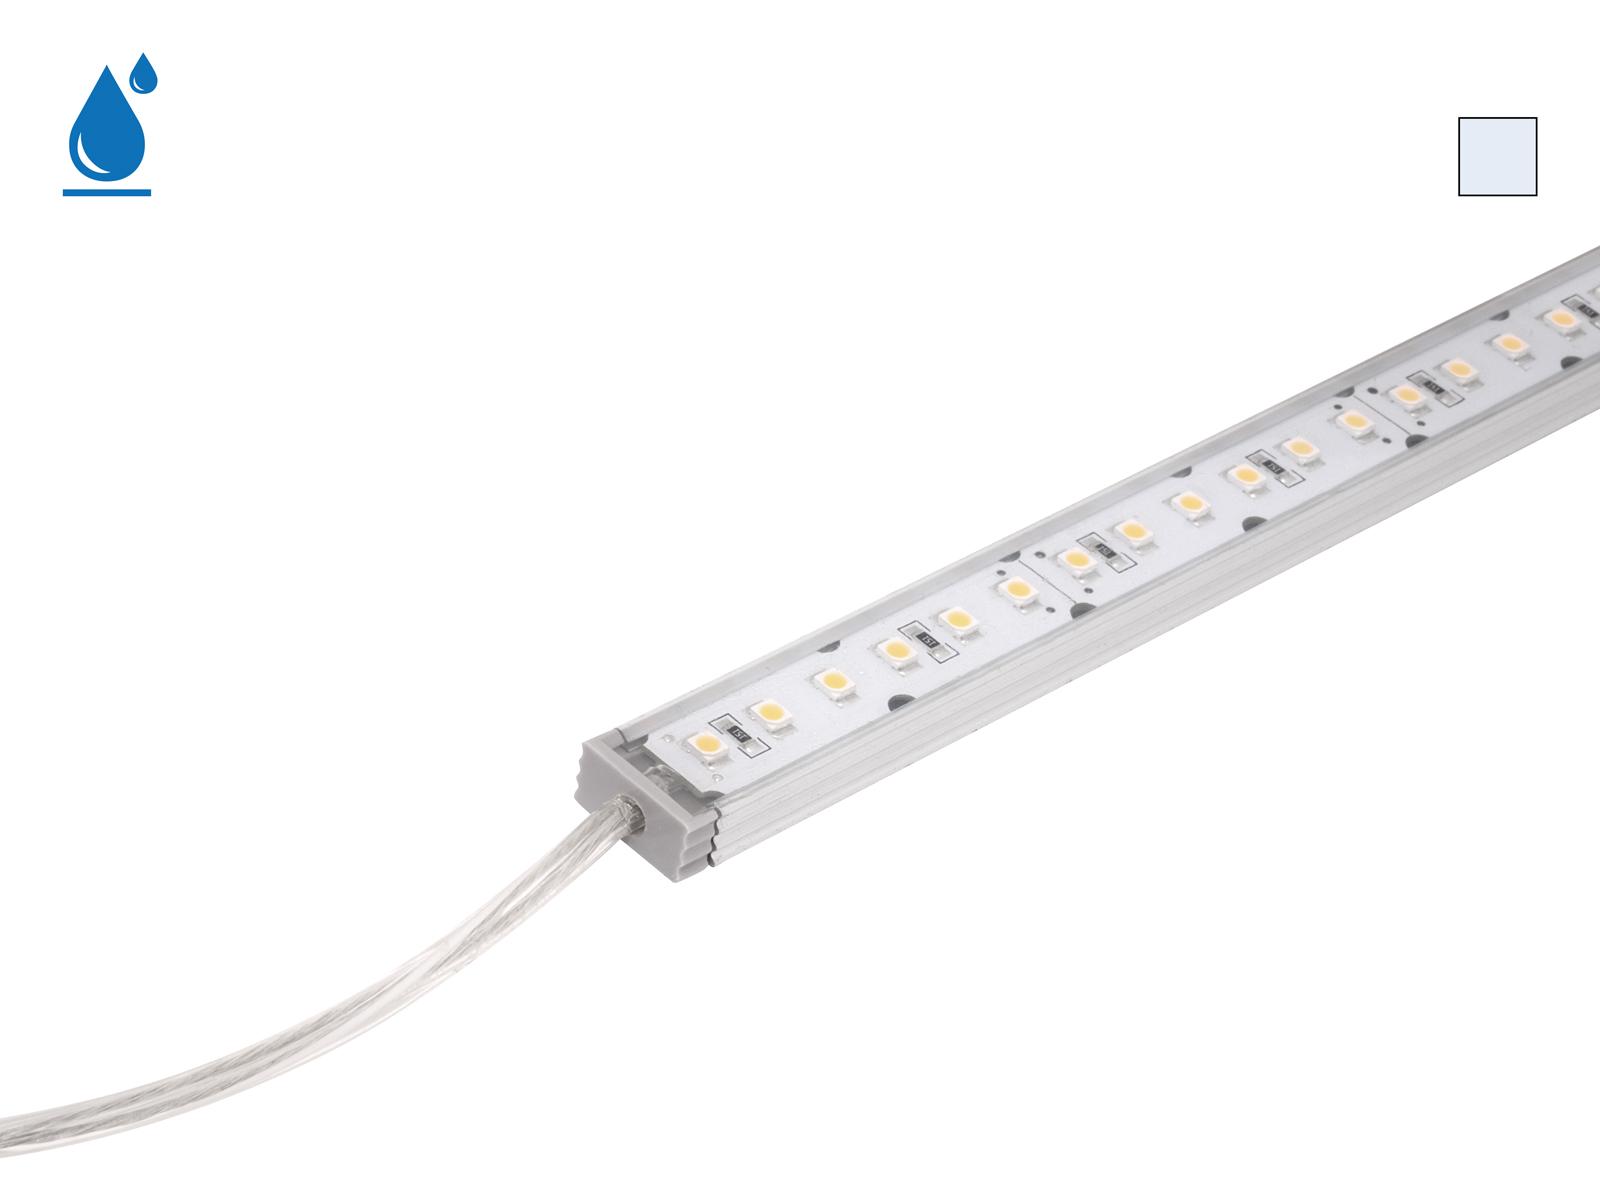 https://www.pur-led.de/out/pictures/master/product/1/lei-6560705_led-leiste_05m_60leds_ip65_kaltweiss_1600.jpg